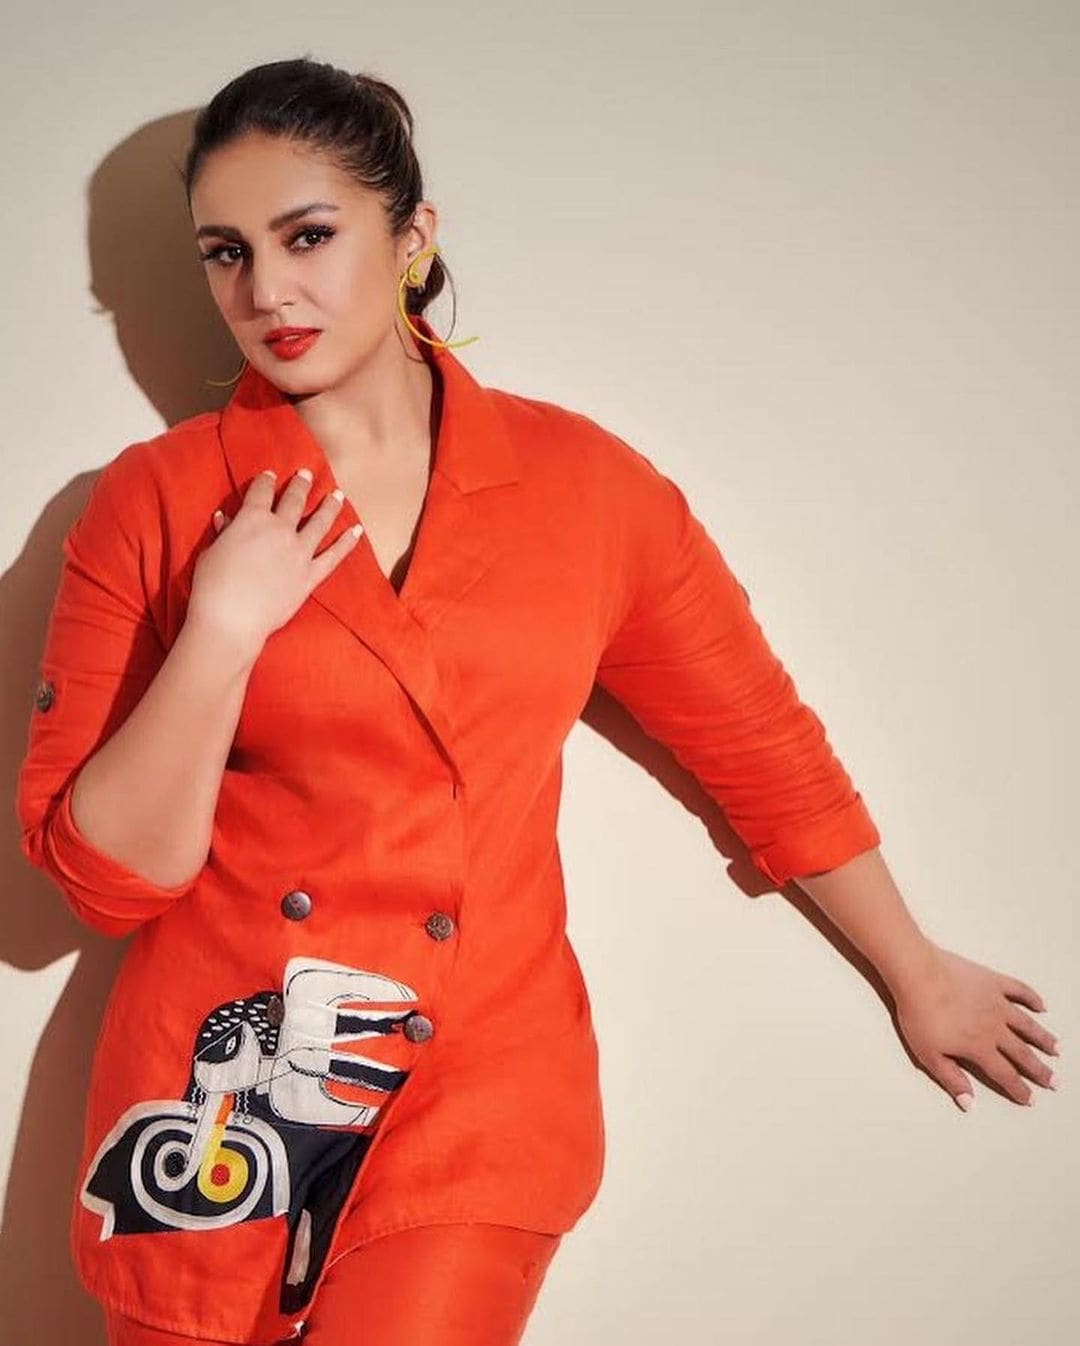 Huma Qureshi Gives Boss-Lady Vibes in Orange Pantsuit